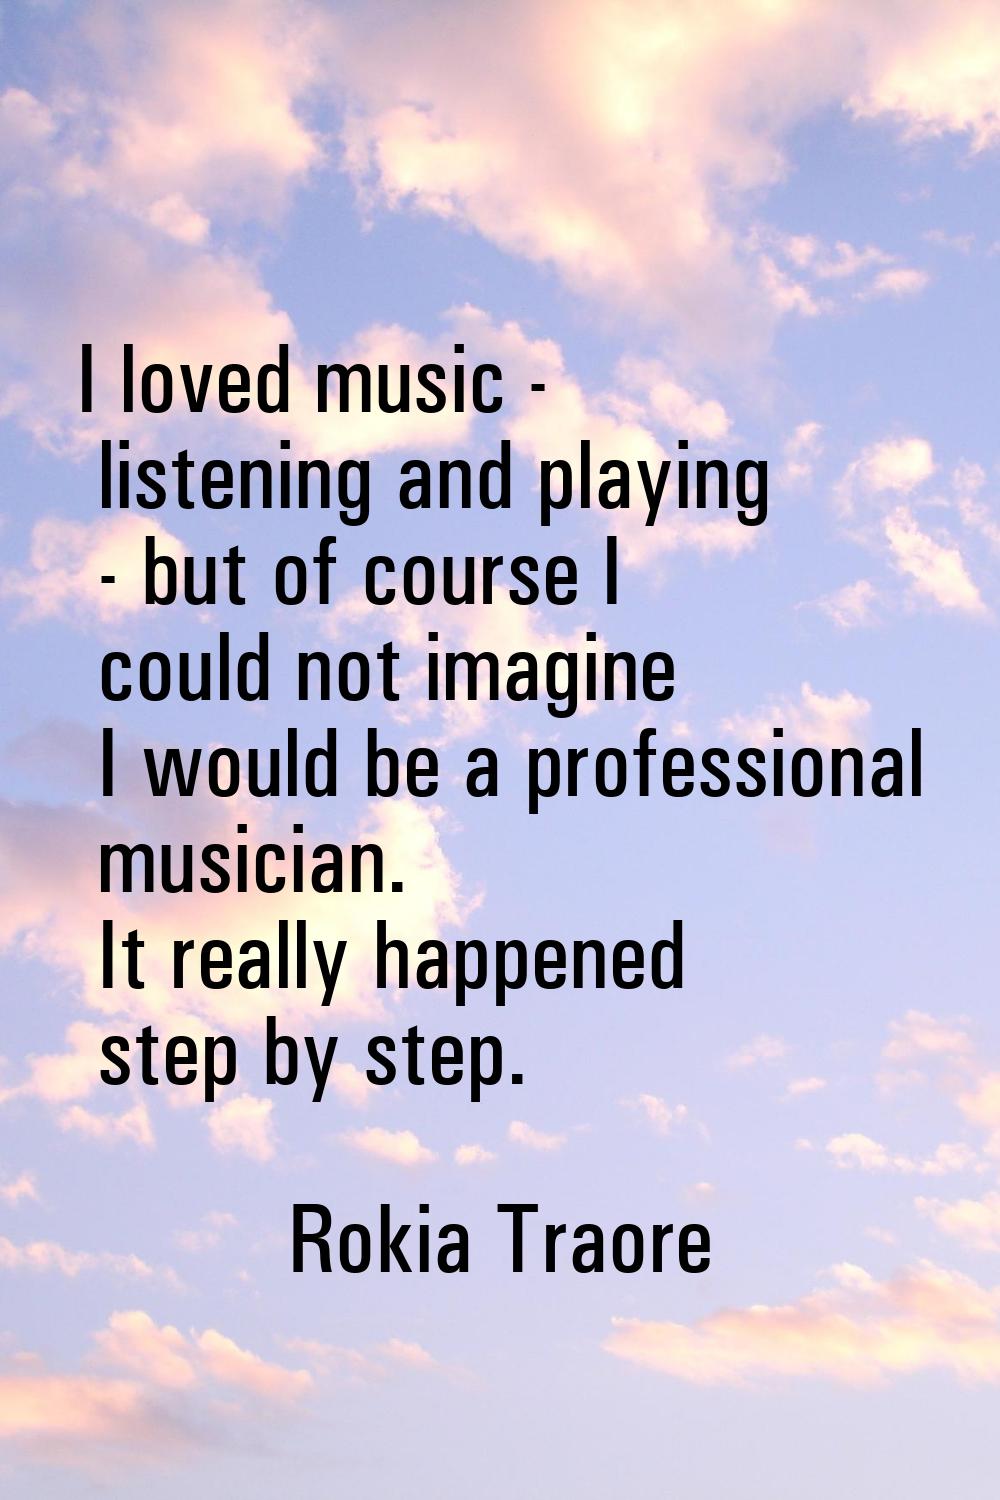 I loved music - listening and playing - but of course I could not imagine I would be a professional